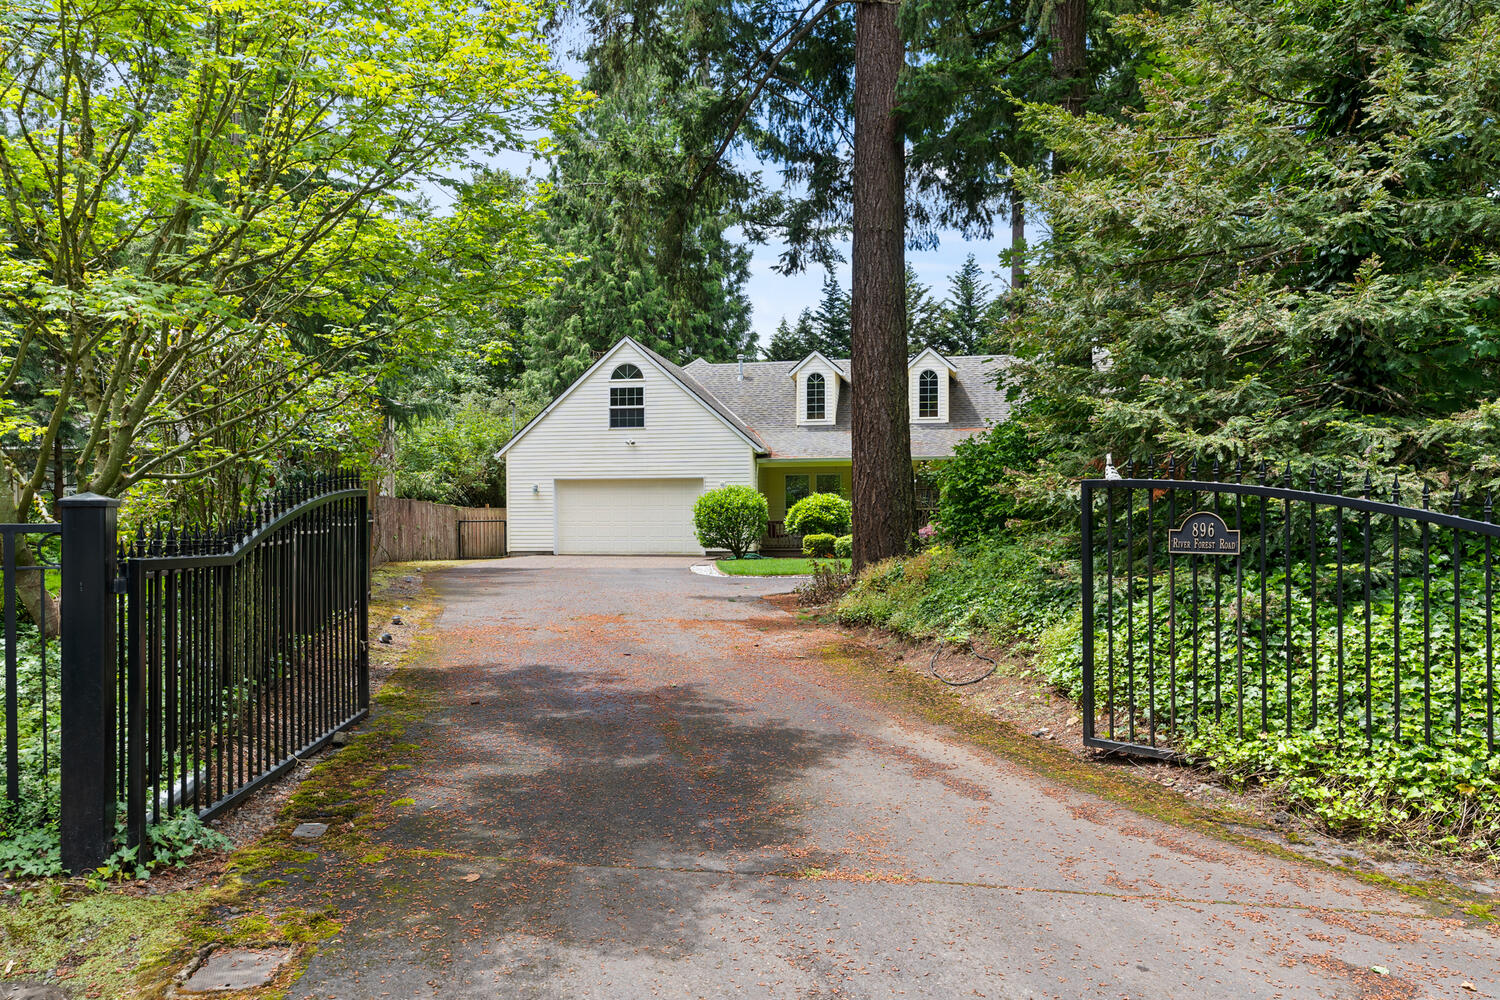 Home for sale in Milwaukie